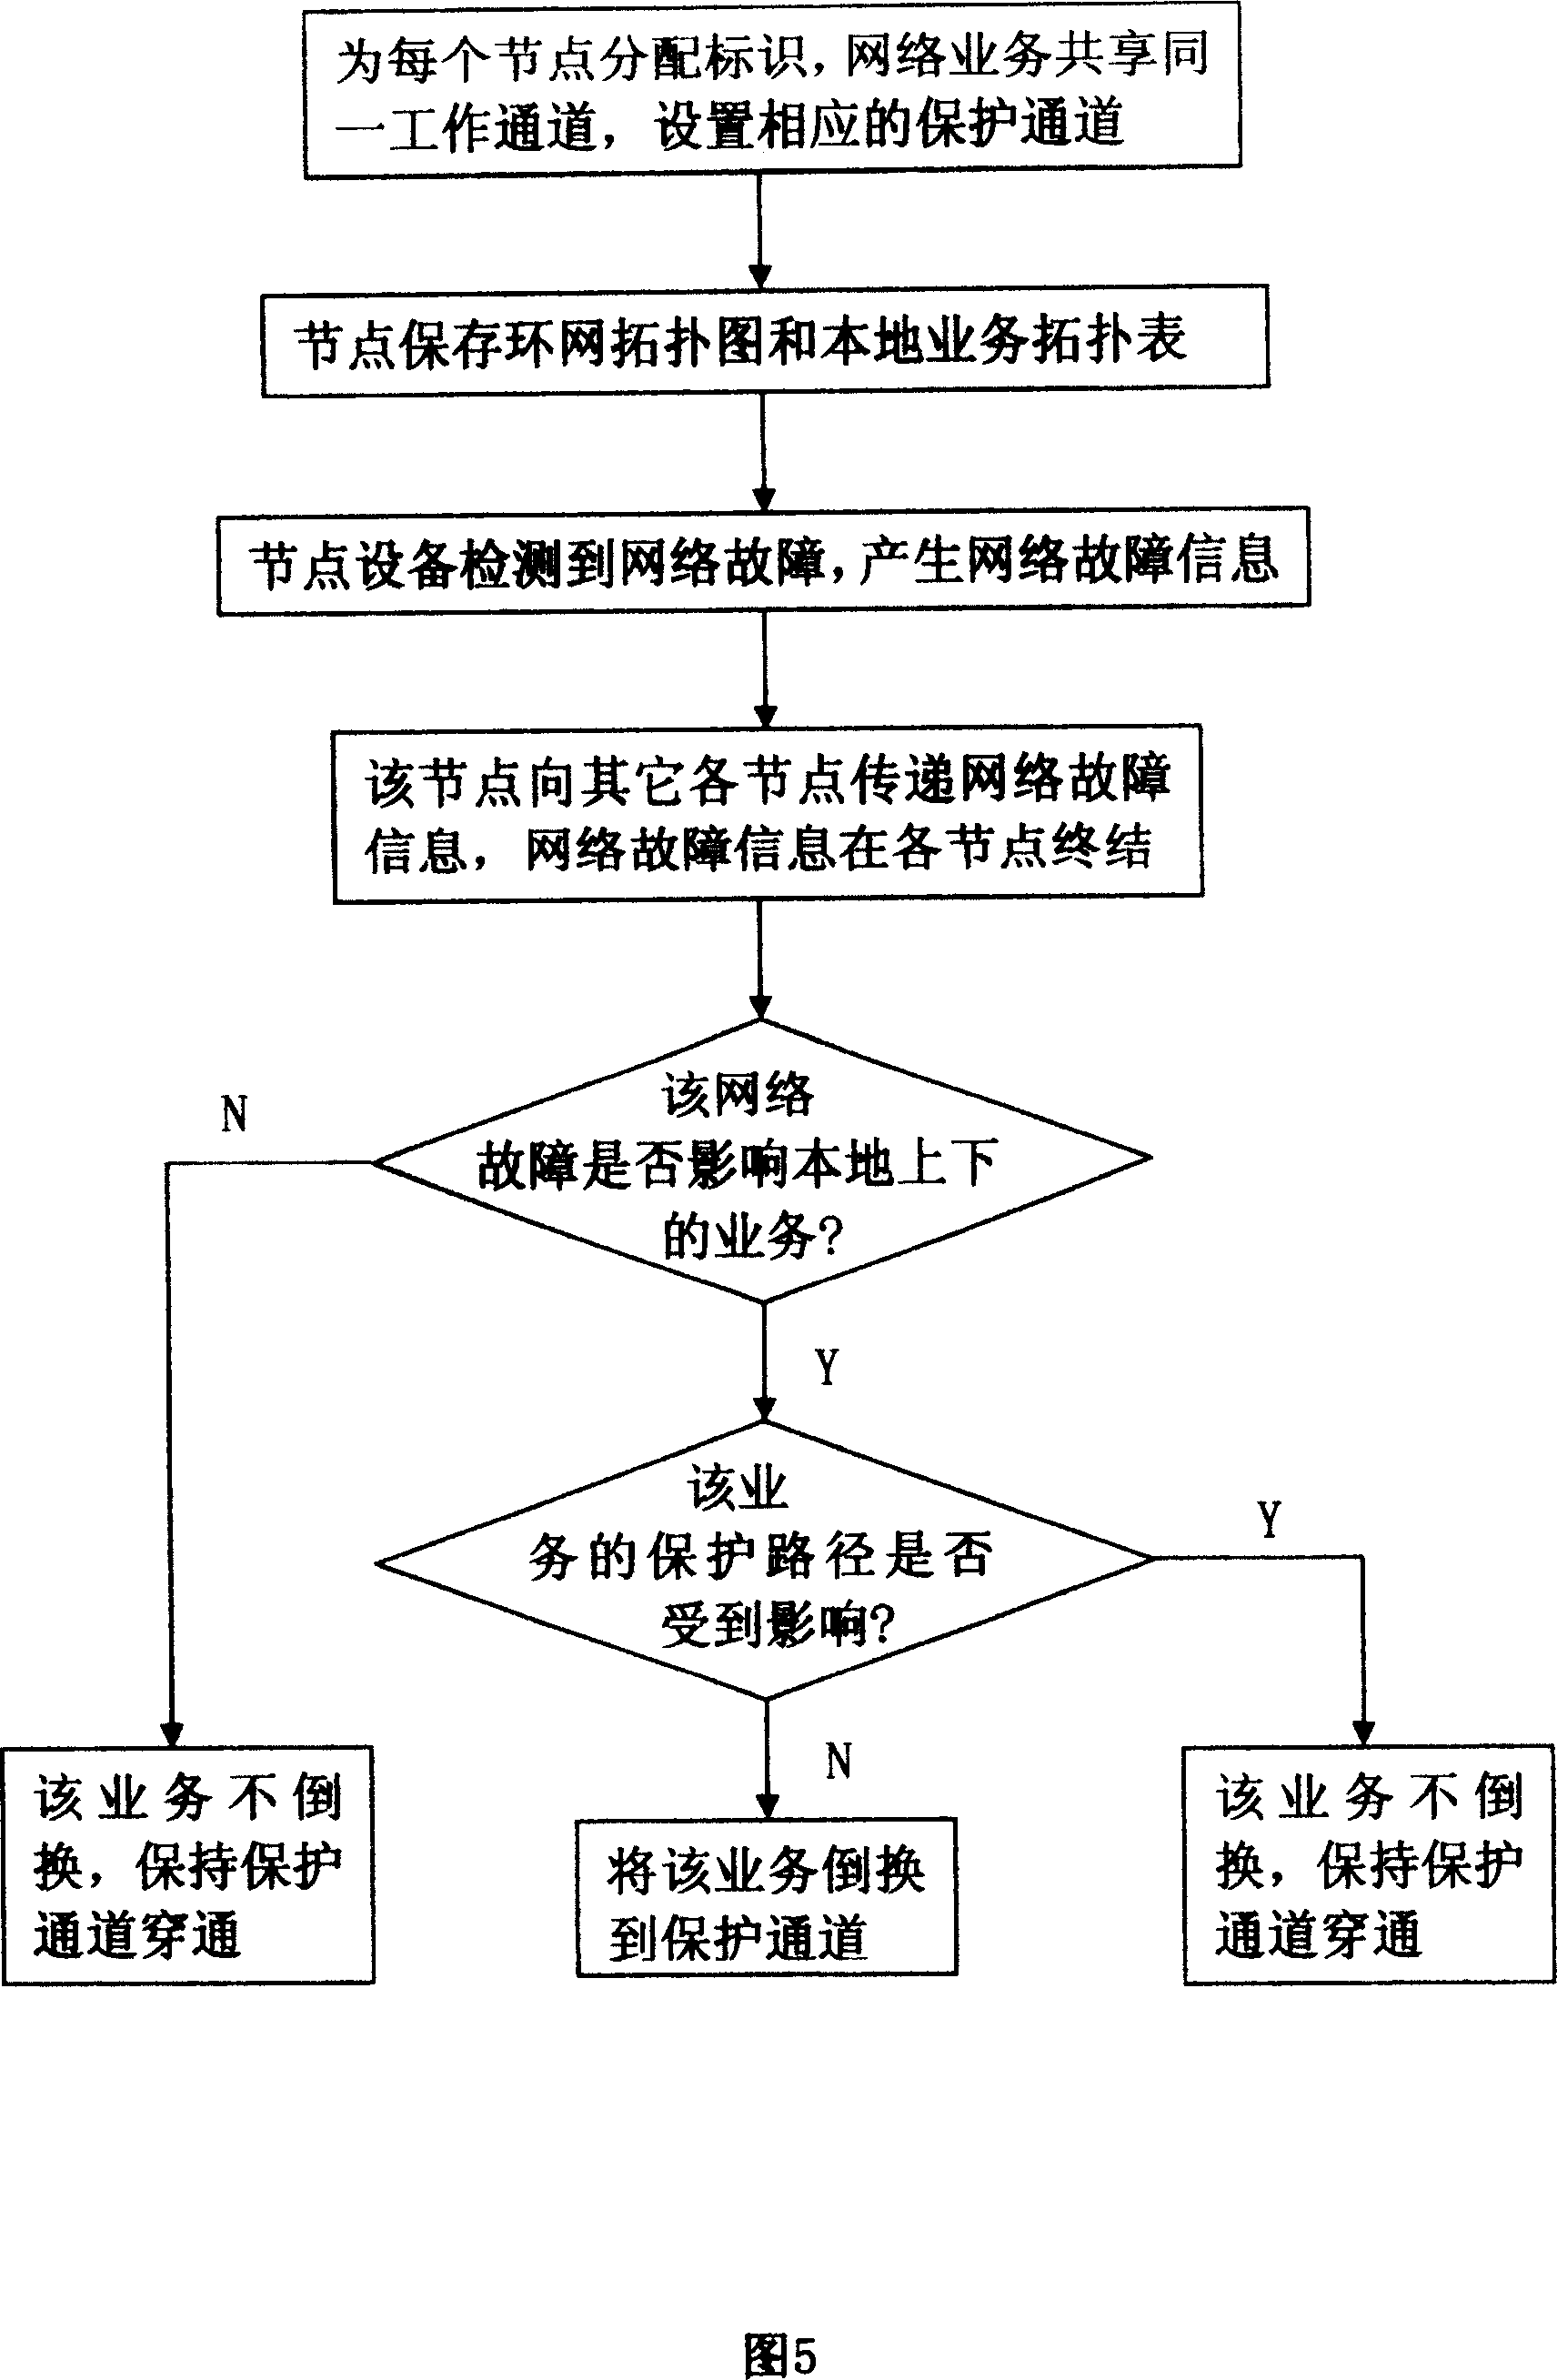 Loop network protection controlling method